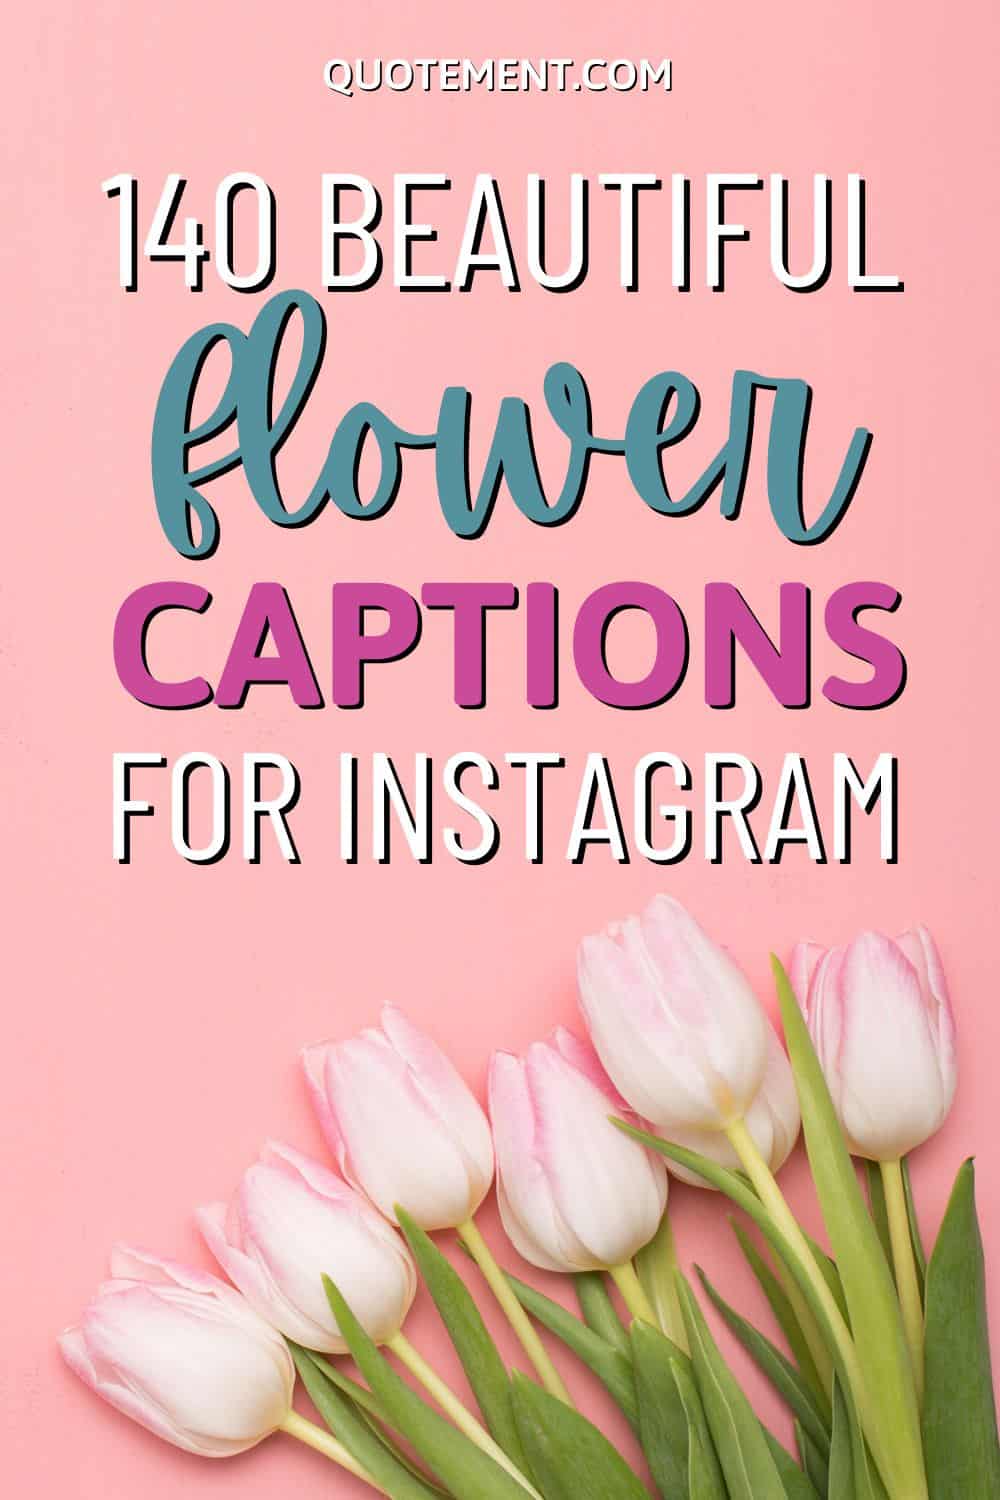 140 Beautiful Flower Captions To Make Your Post Stand Out